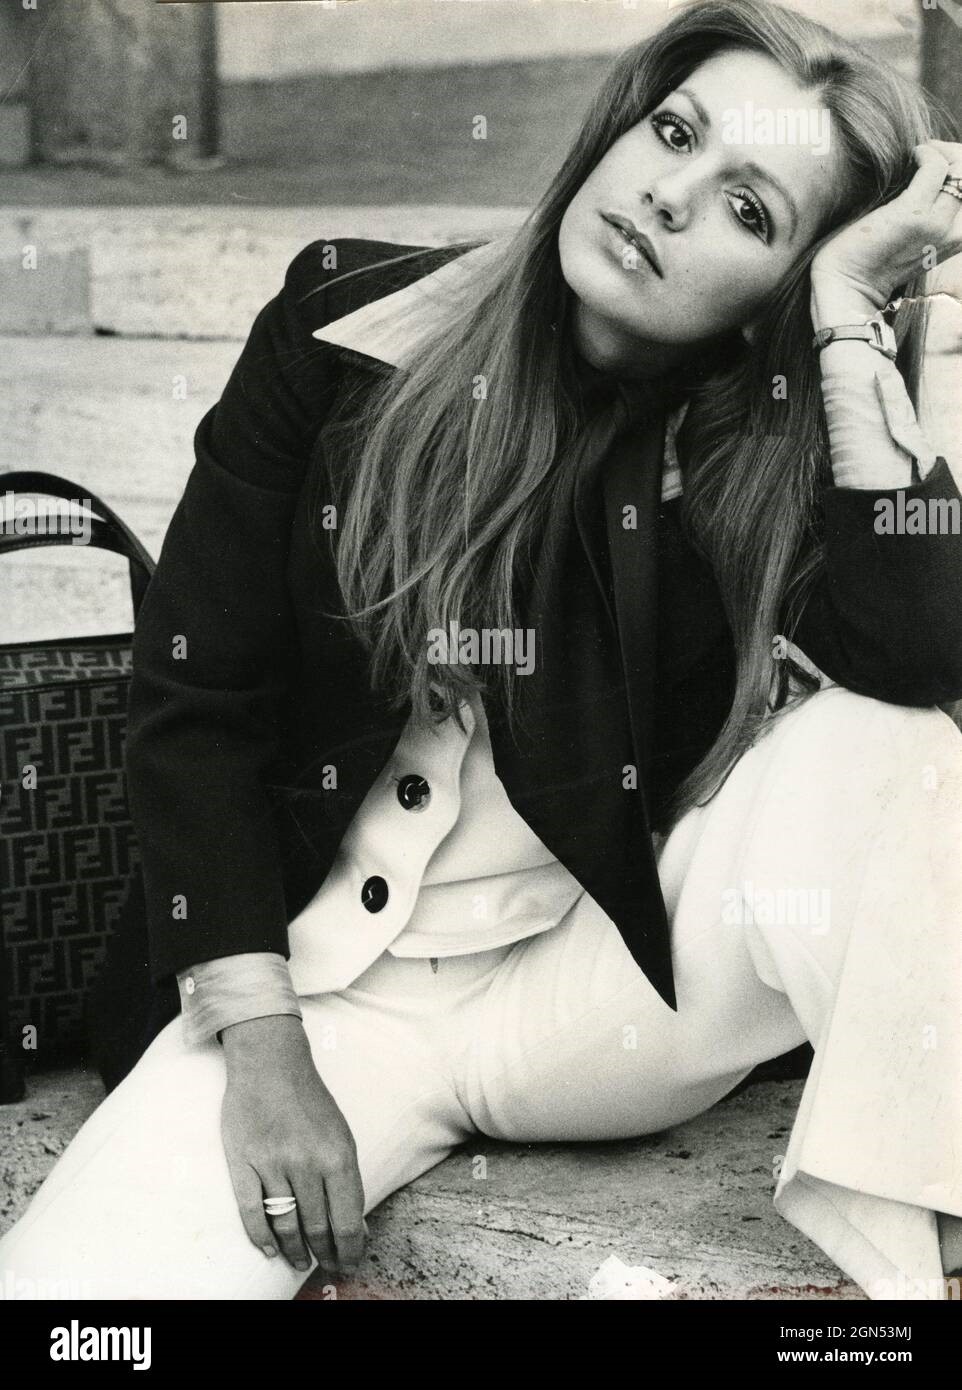 French-Italian actress Catherine Spaak in the 1970s.